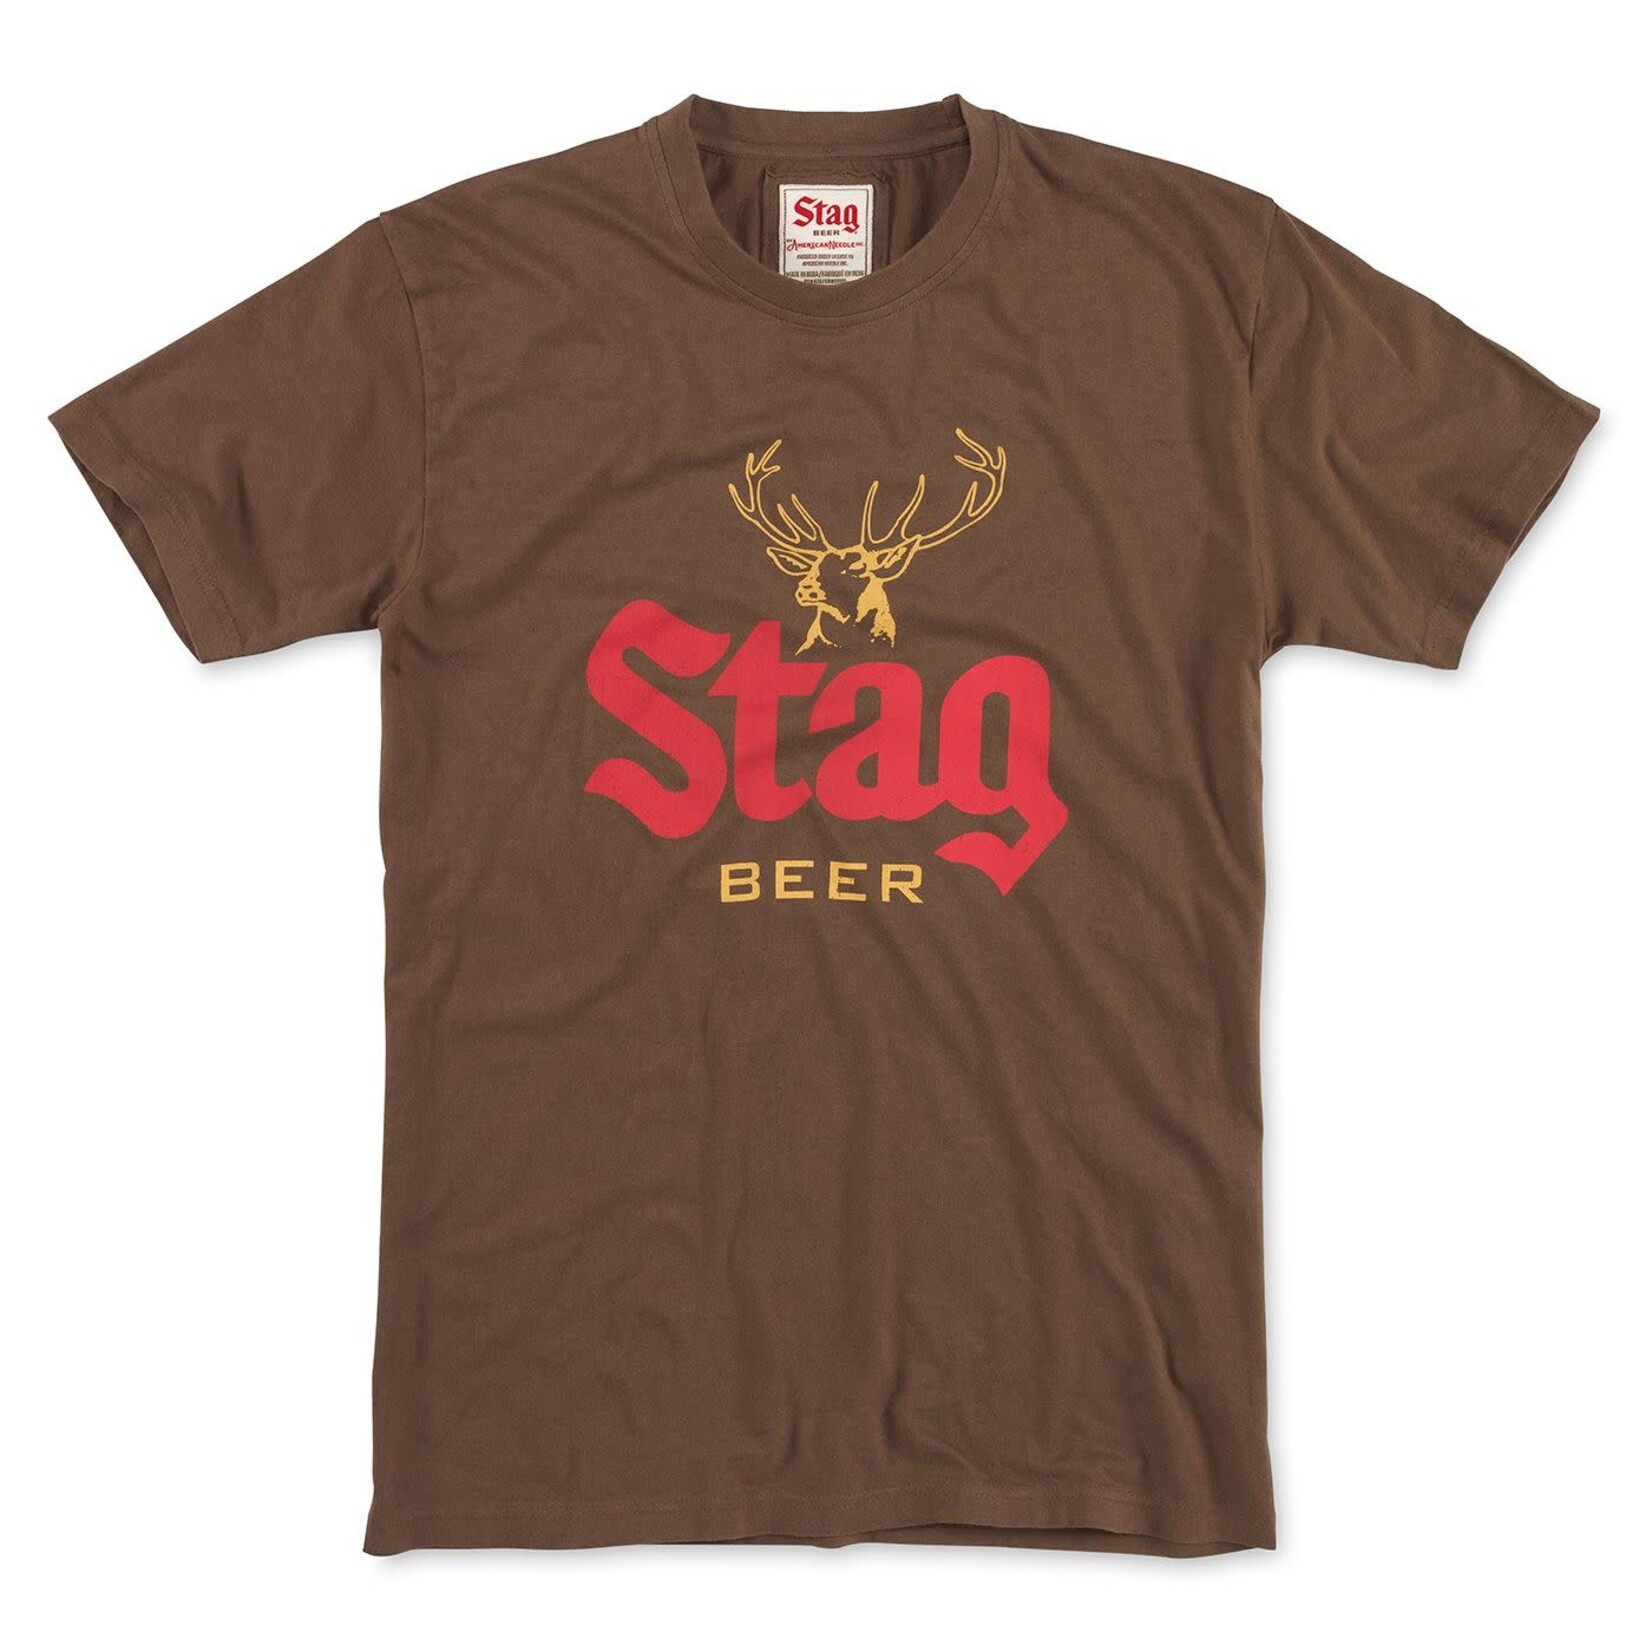 American Needle Stag Beer T-shirt